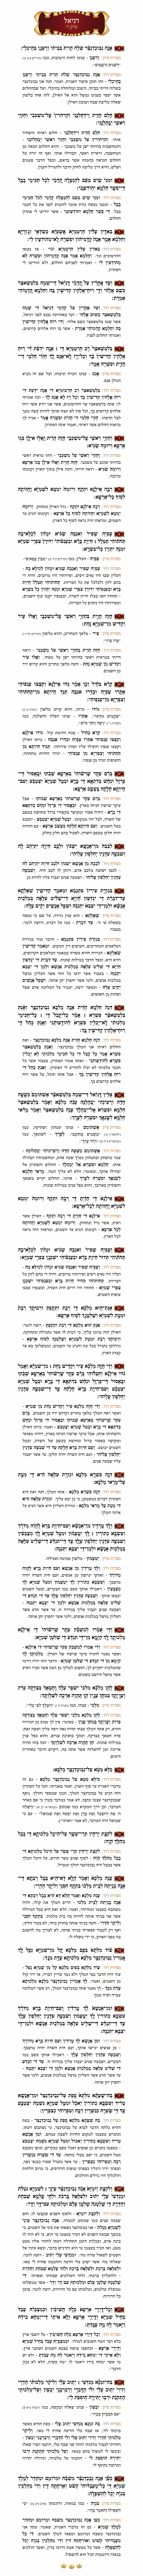 Sefer Daniel Chapter 4 with commentary